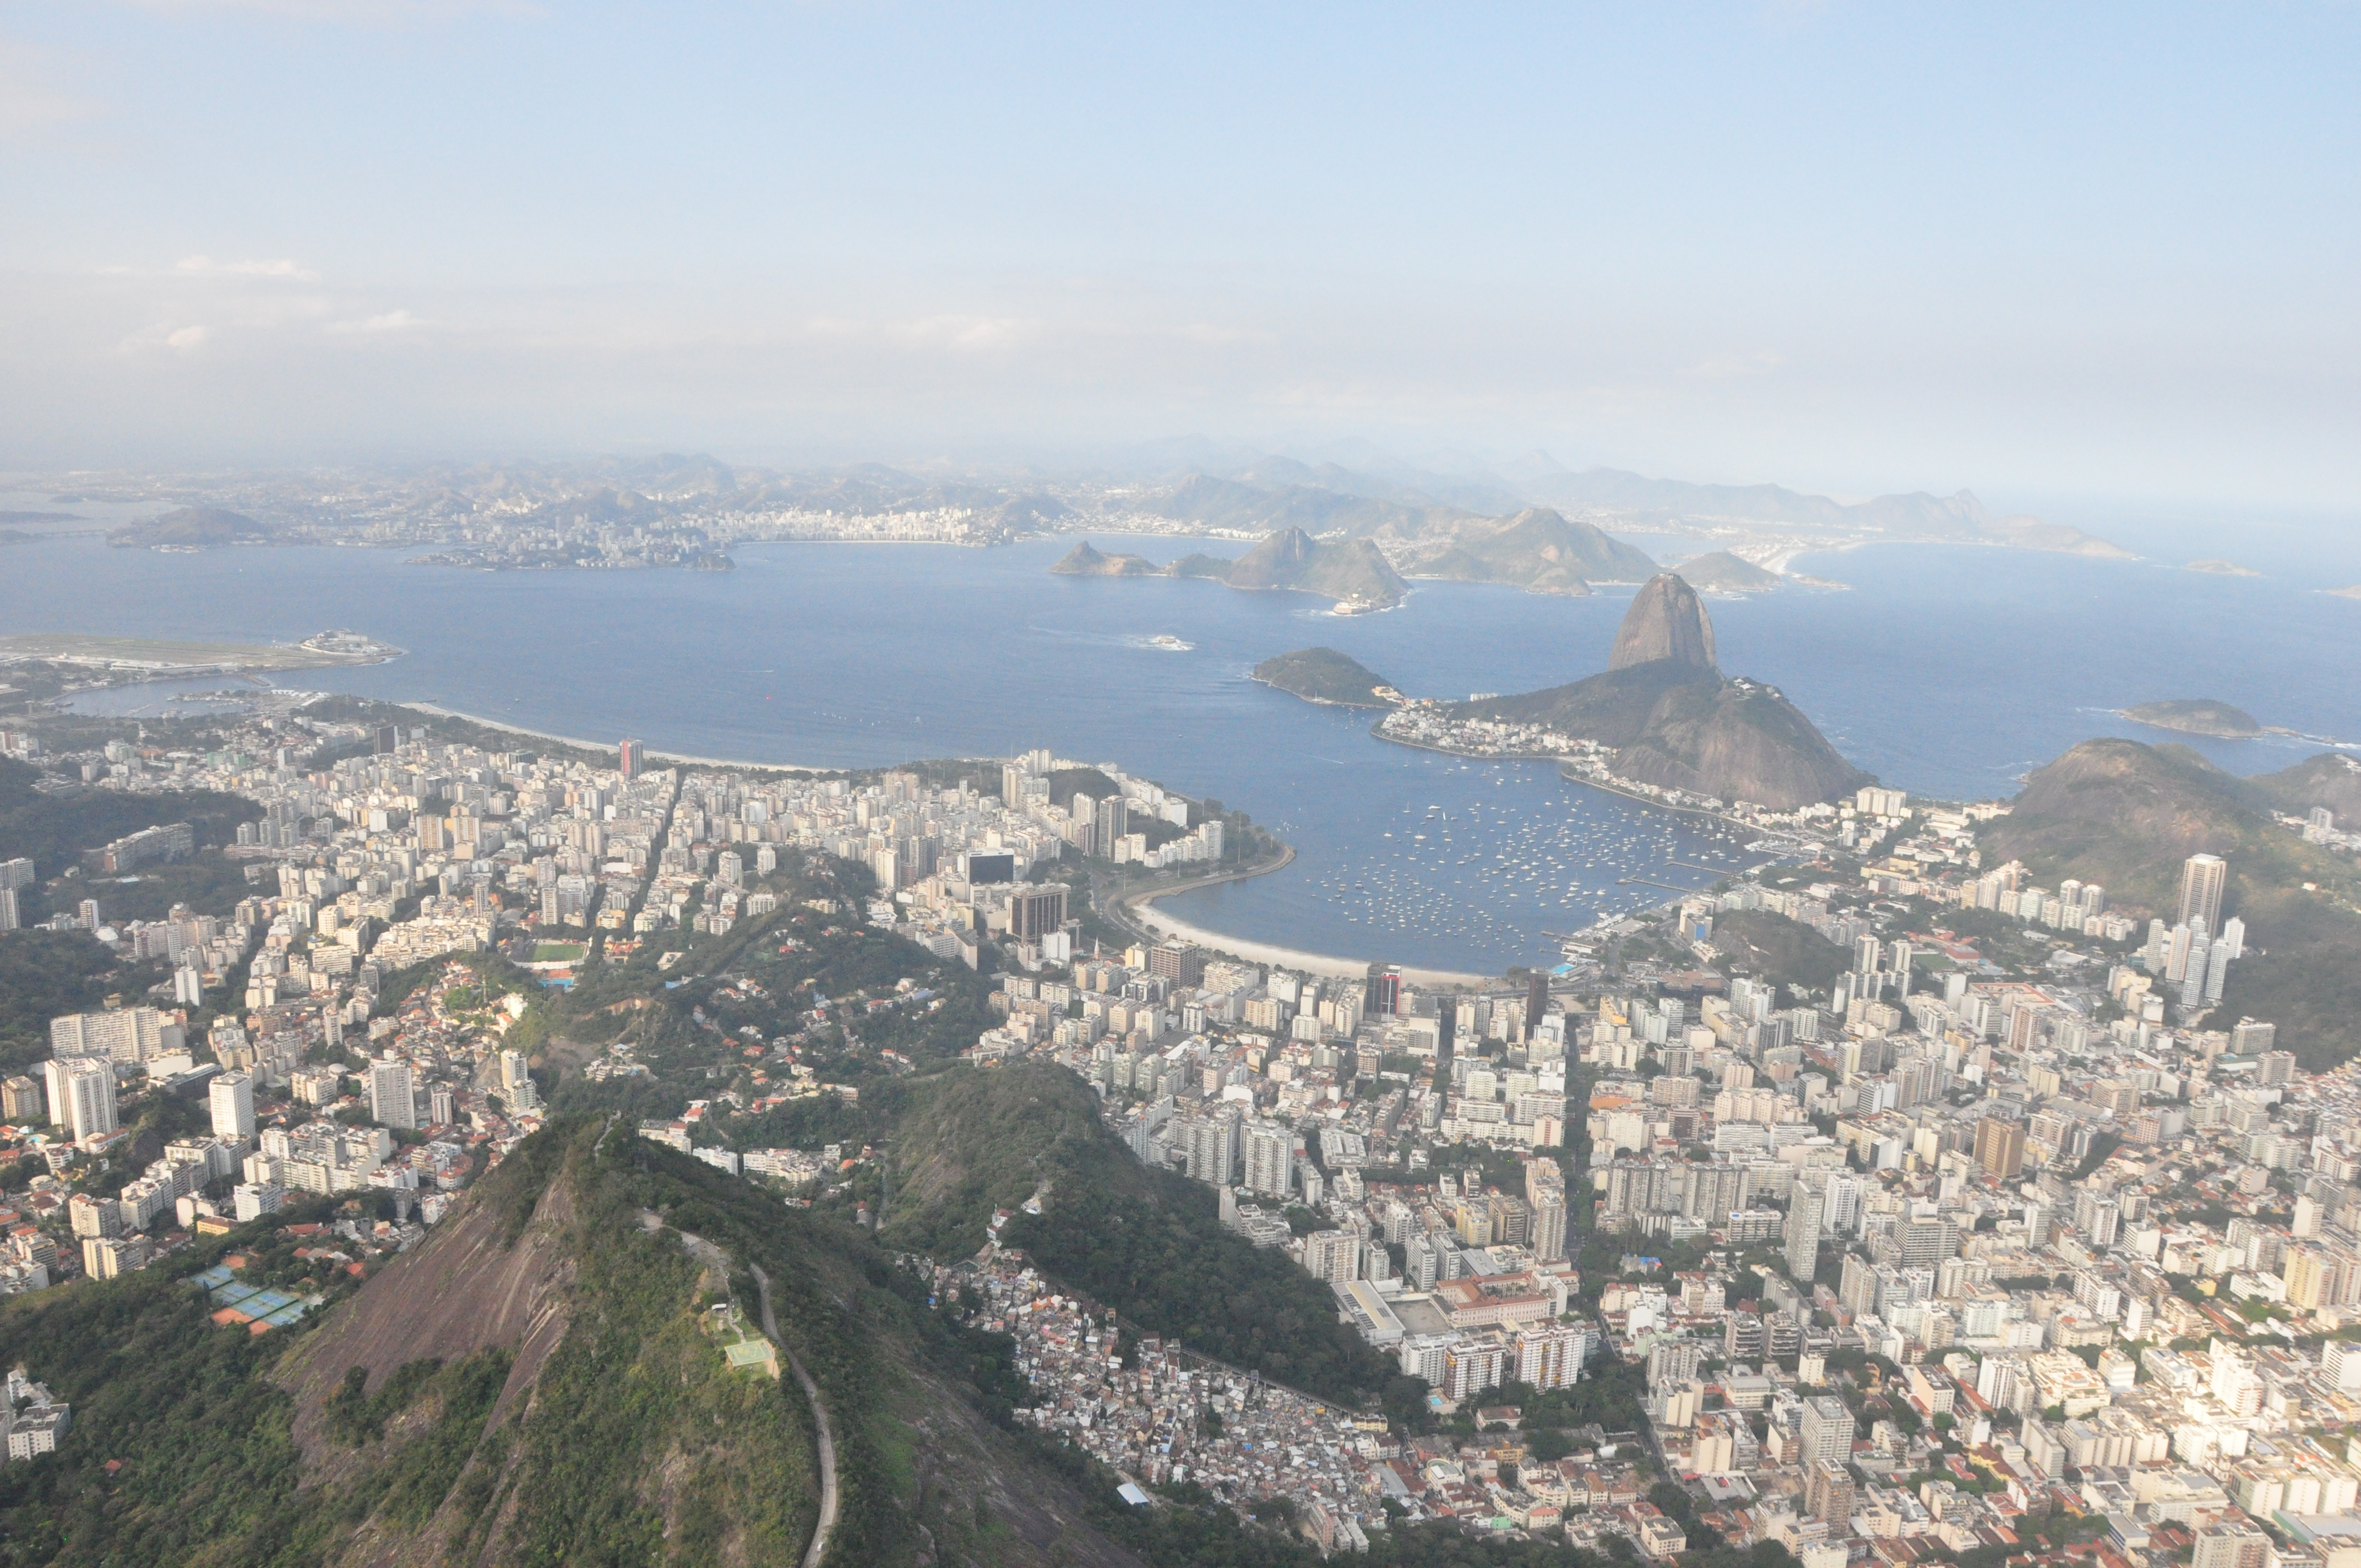 Rio de Janeiro: a beautiful place to live and conduct research